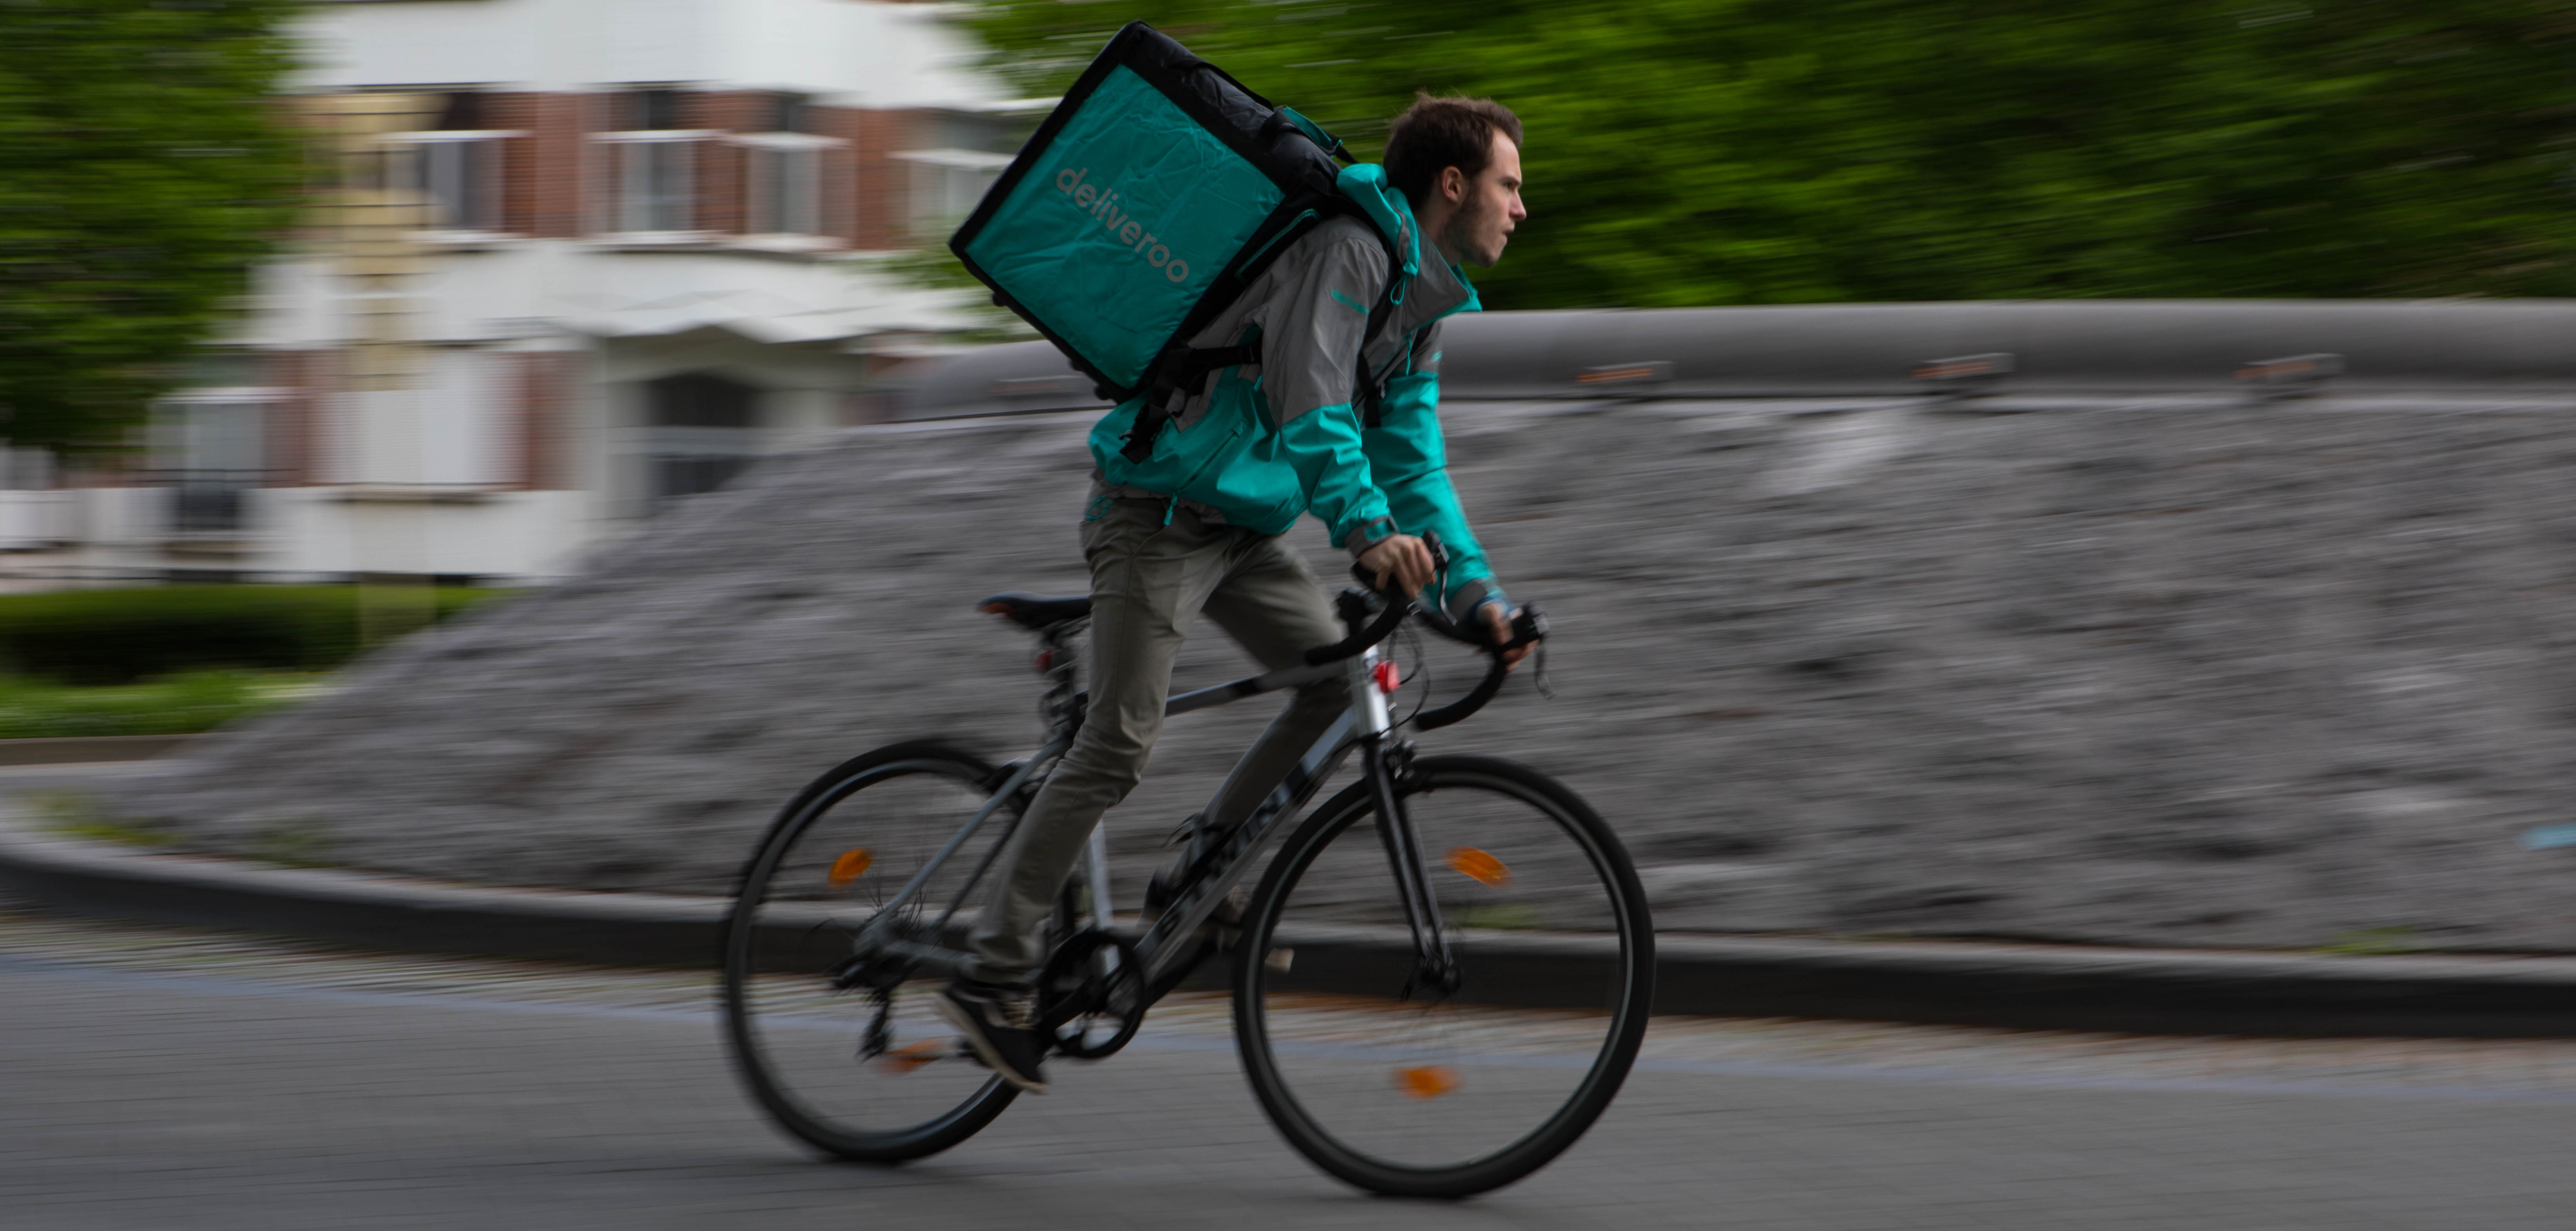 Deliveroo rider in Brussels